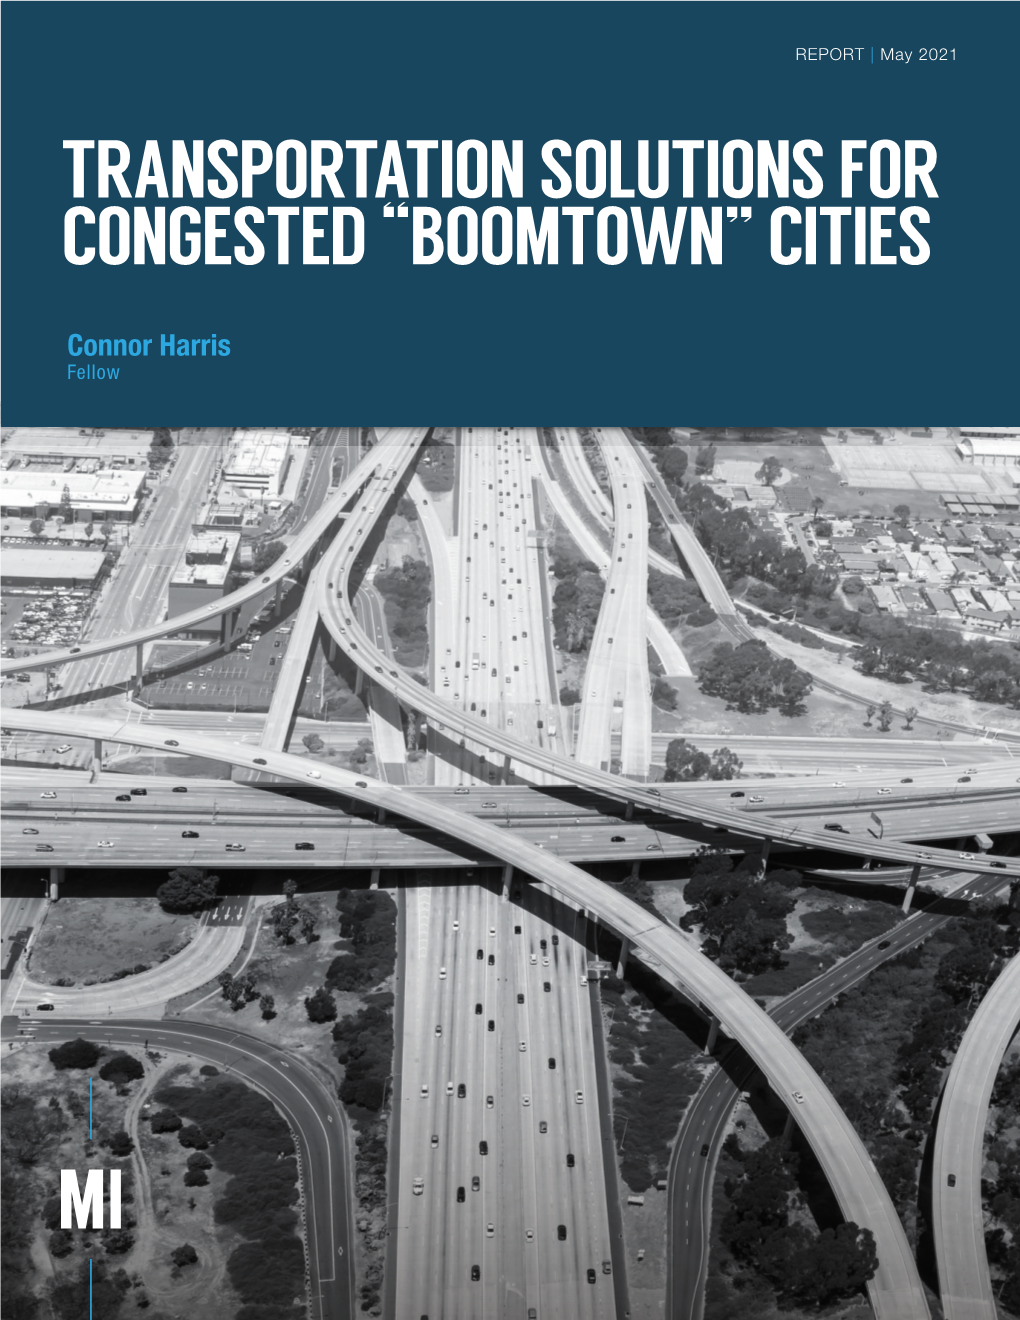 Transportation Solutions for Congested “Boomtown” Cities | Manhattan Institute